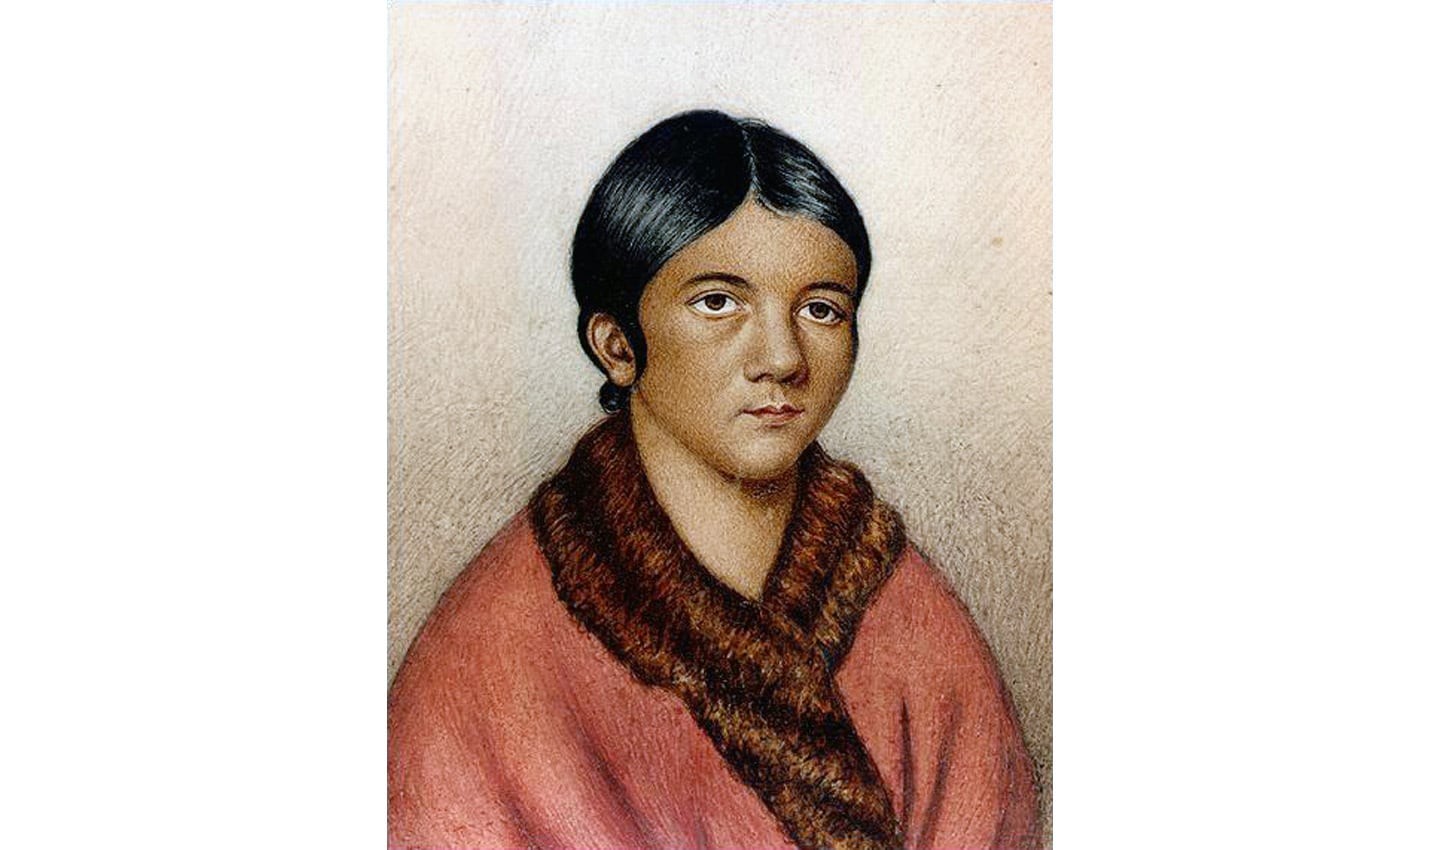 Shanawdithit was a member of the Beothuk tribe in the early 19th century.